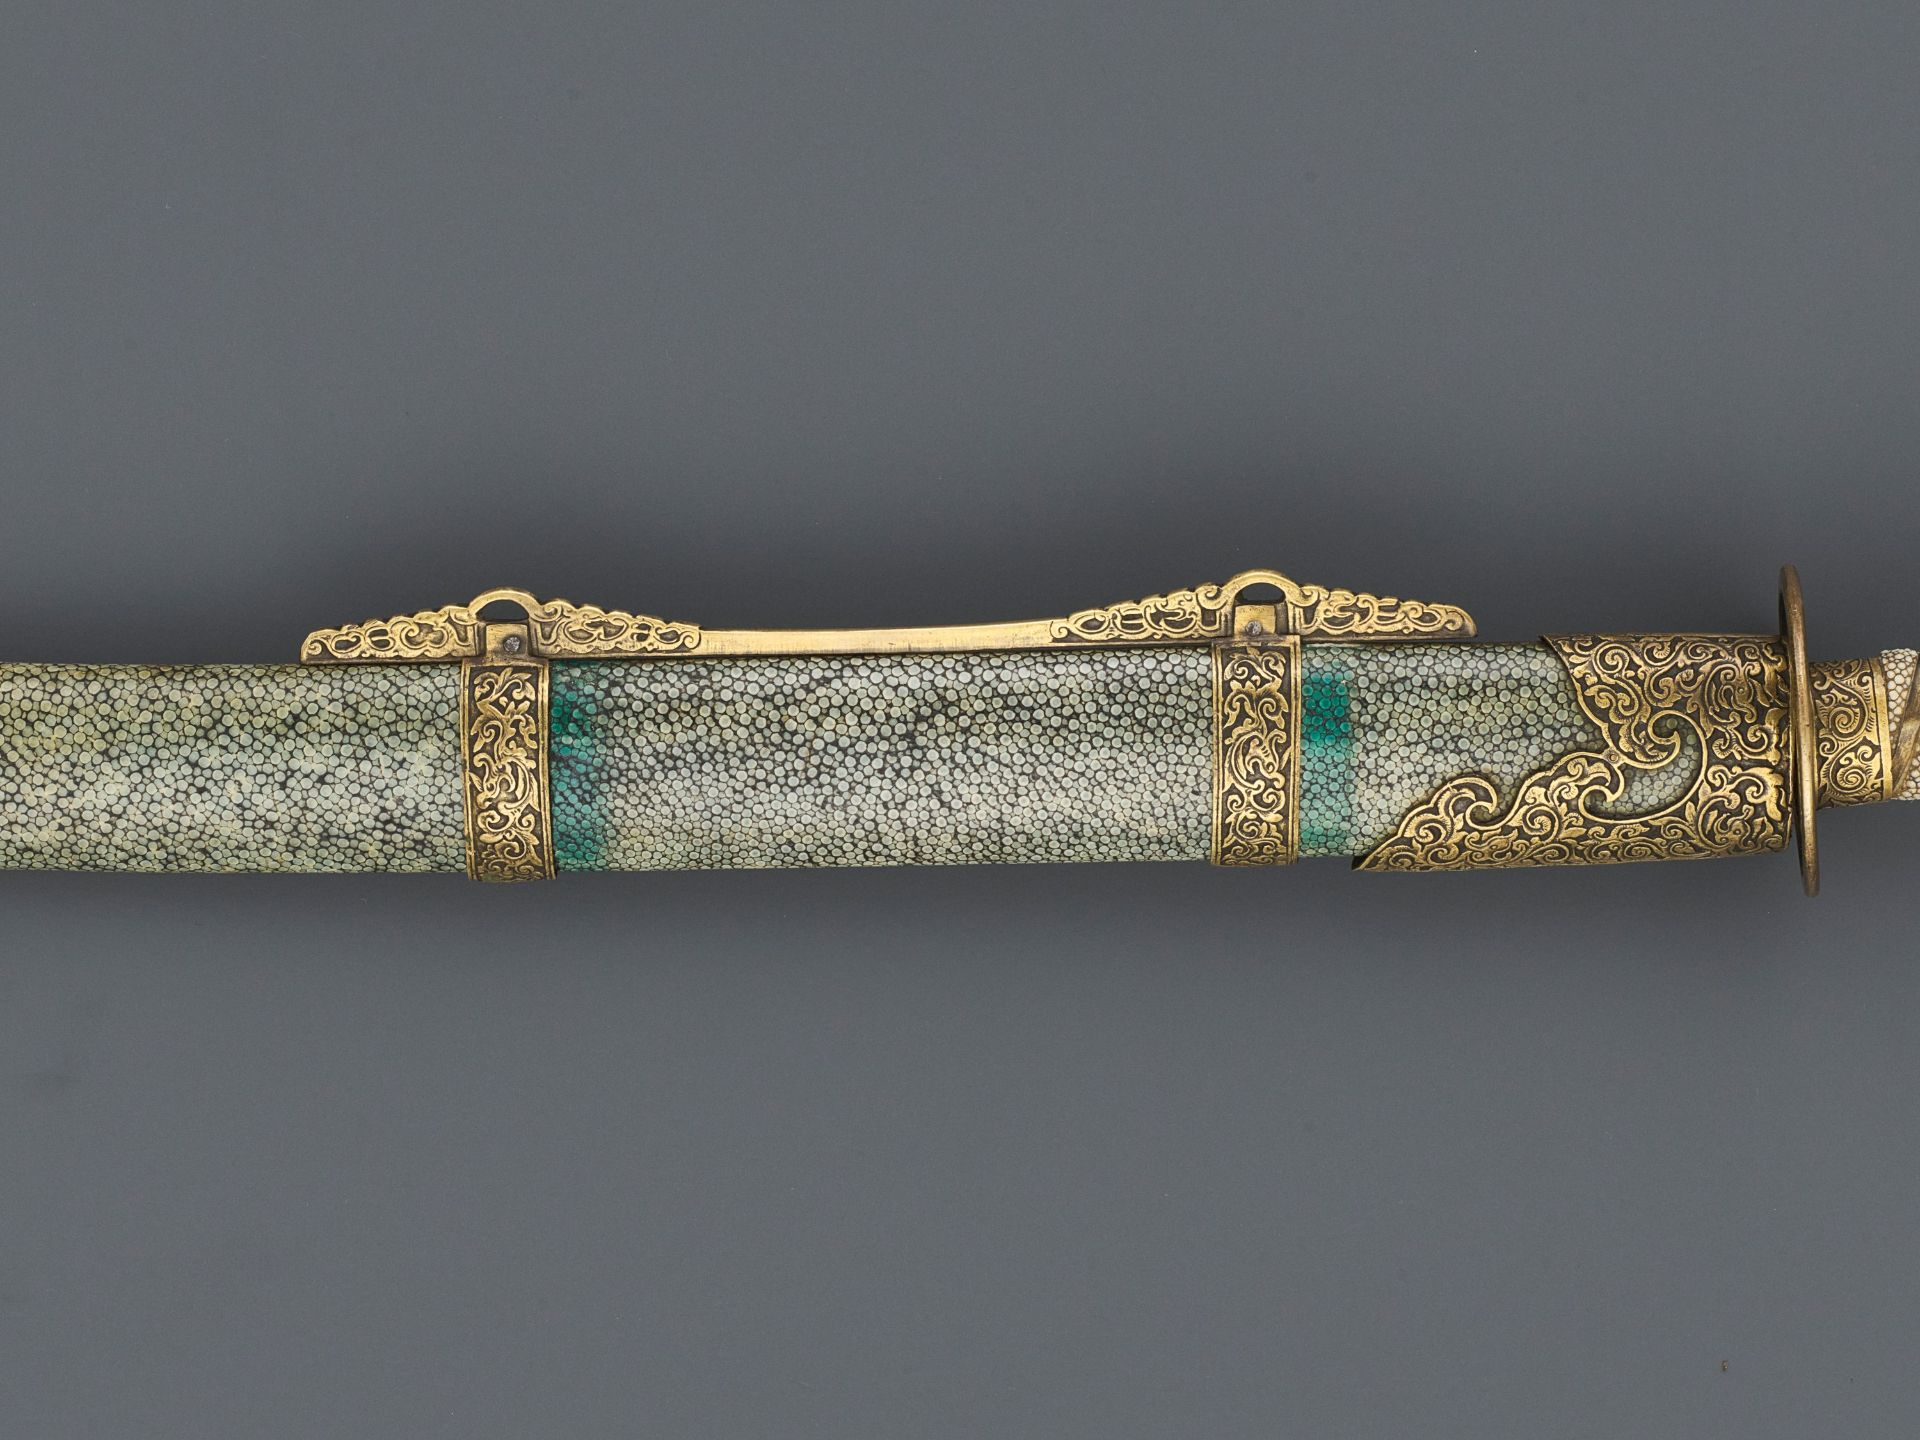 A CEREMONIAL SWORD AND SCABBARD, QING DYNASTY - Image 3 of 7